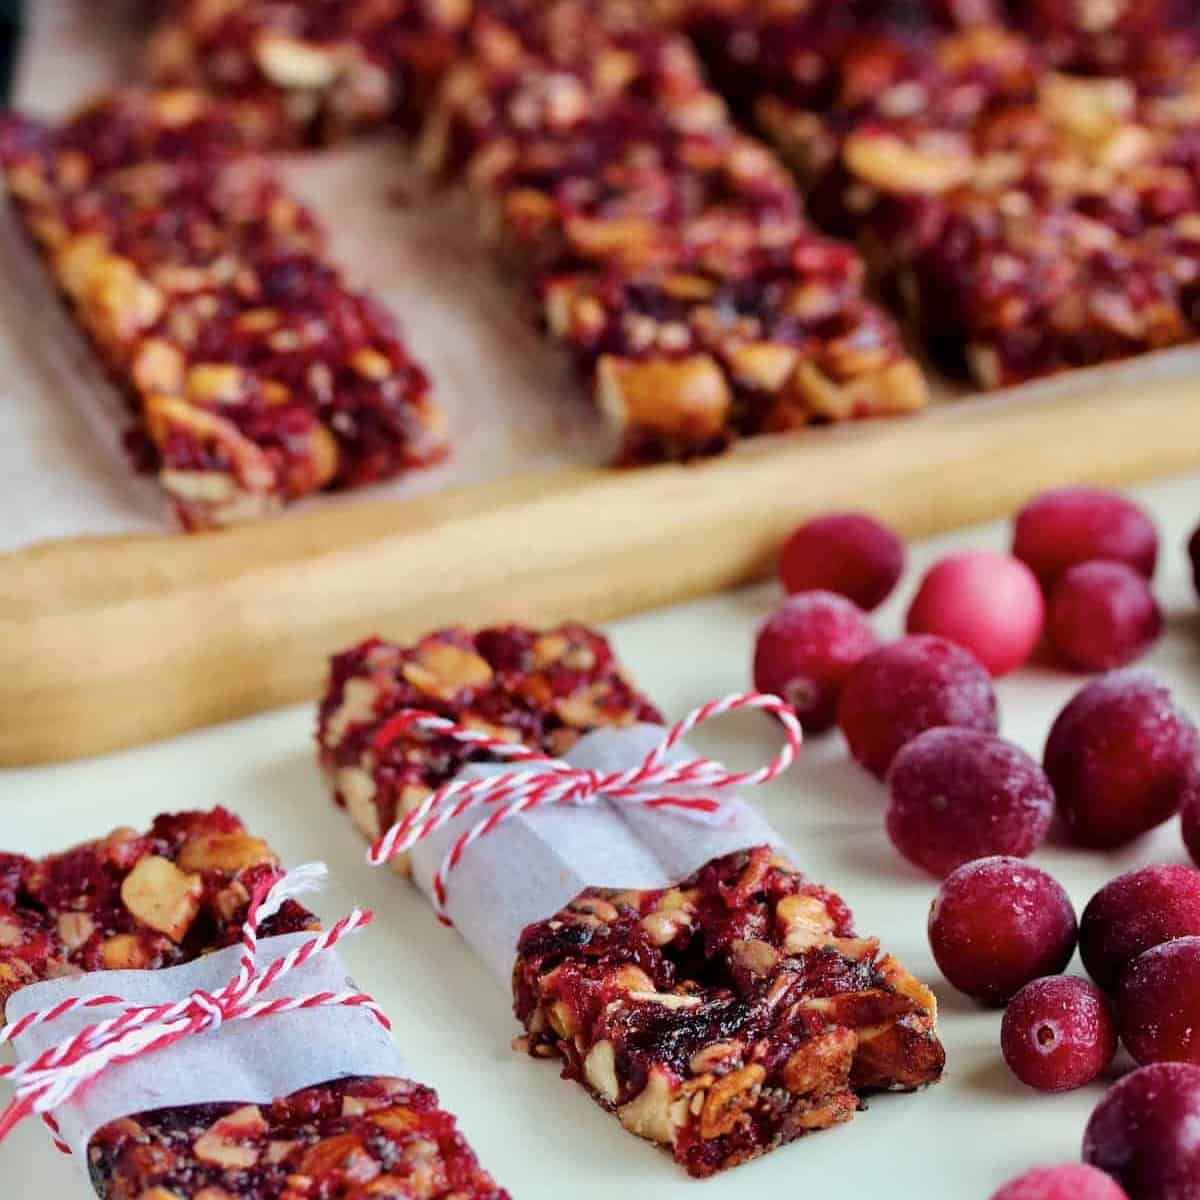 Wrapped cranberry crunch bars with fresh cranberries.